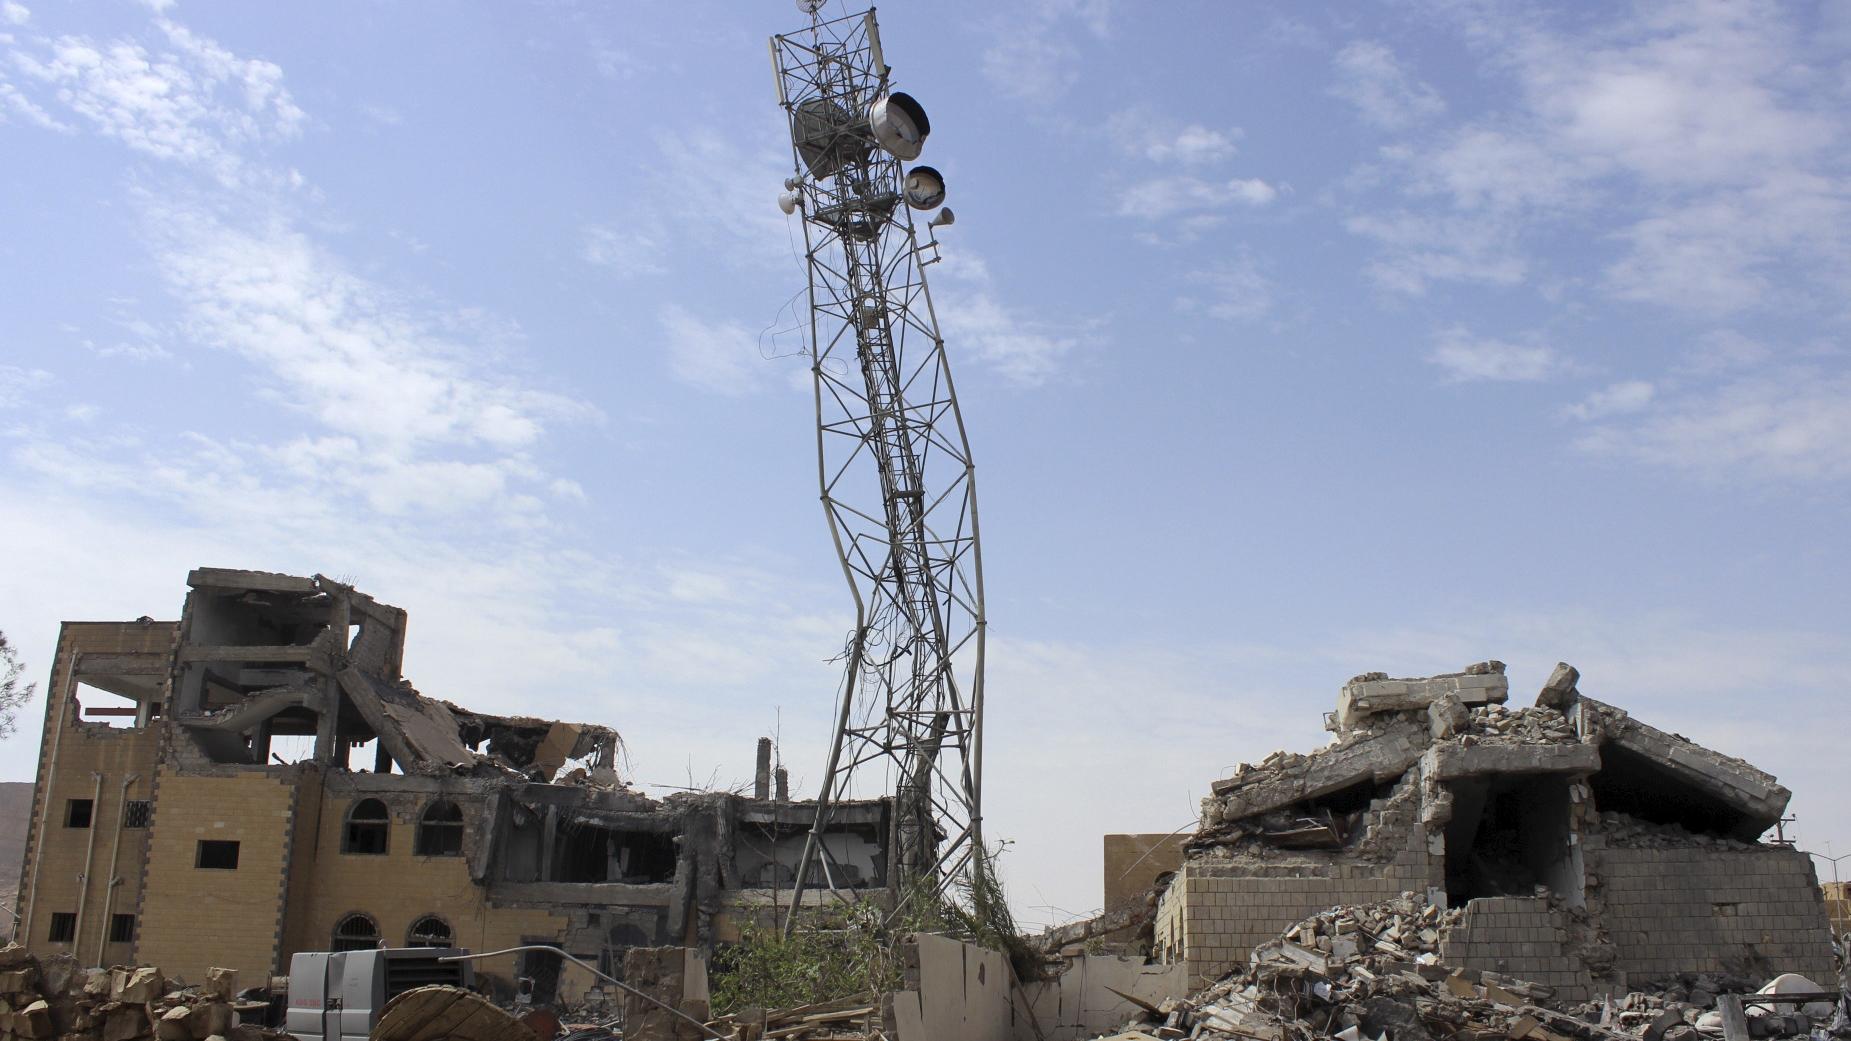 A telecommunications center destroyed by a recent Saudi-led air strike, Yemen's northwestern city of Saada, May 2015.